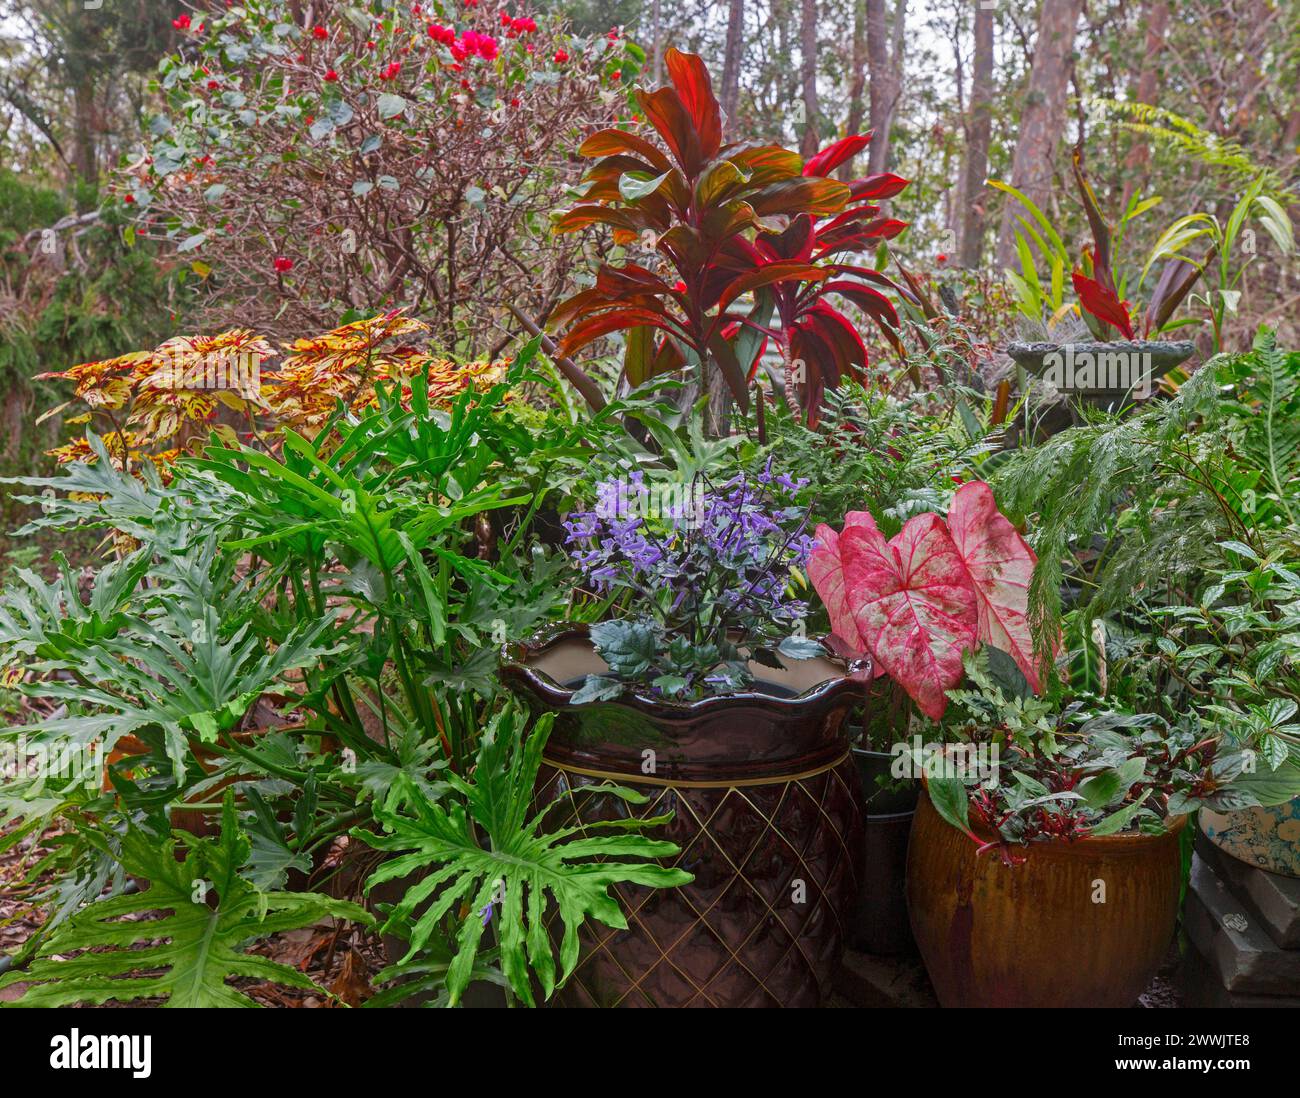 Garden with colourful foliage plants with red, green and orange leaves ...